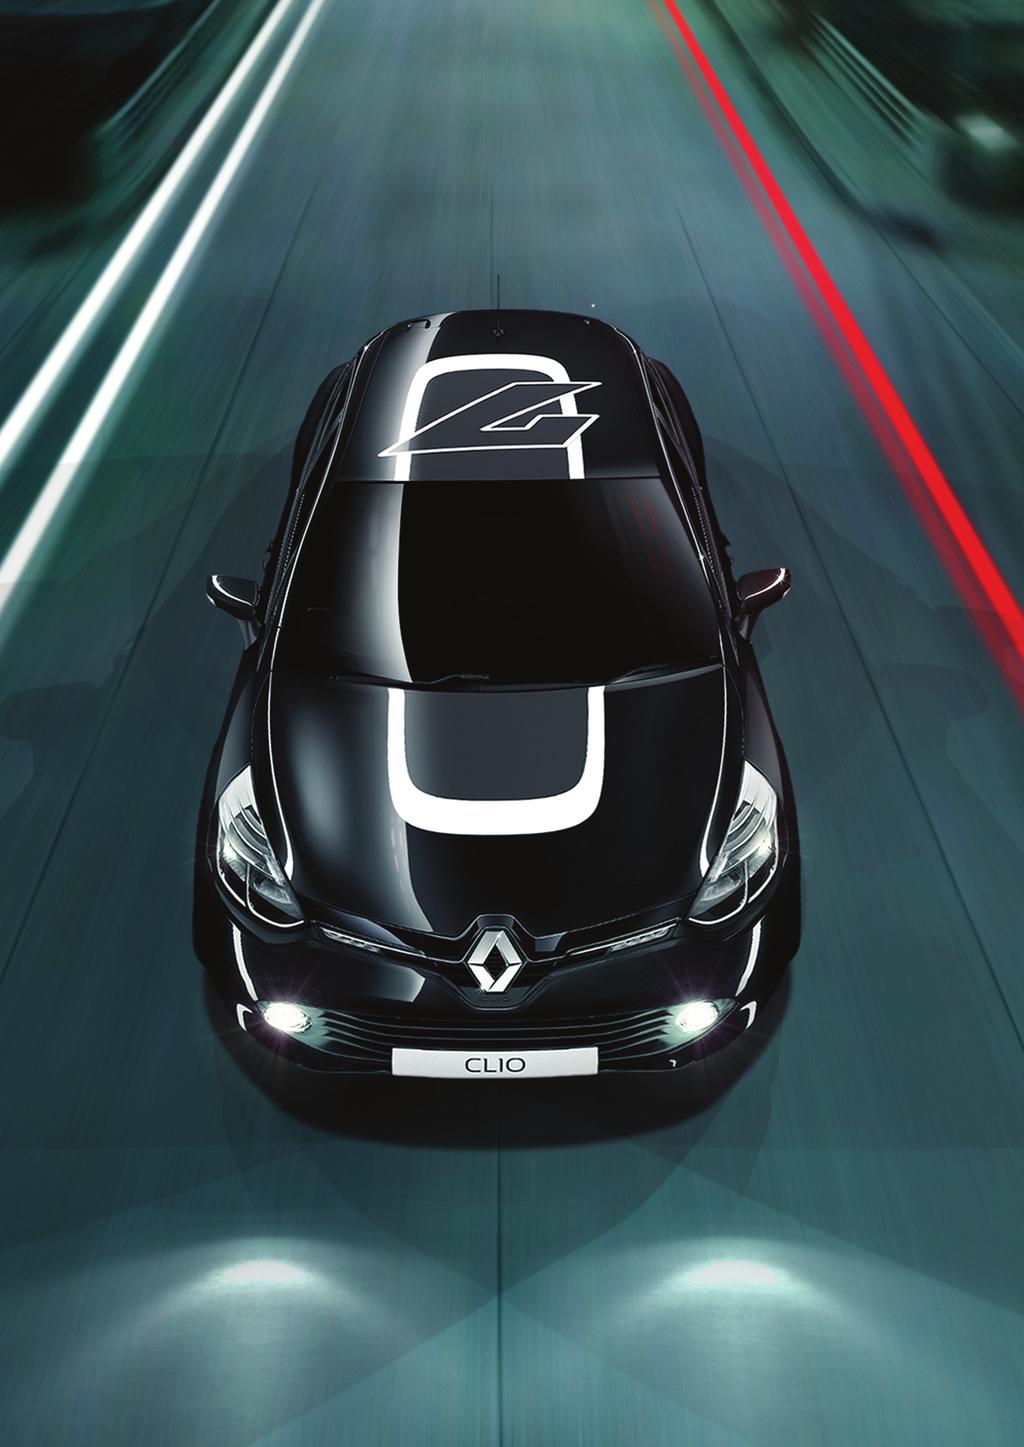 Renault CLIO Expression+ Exterior decals and trim pack Automatic headlights, wipers, entry and engine start Black 16" Passion alloys Nothing says you like extra personalisation and added comfort.